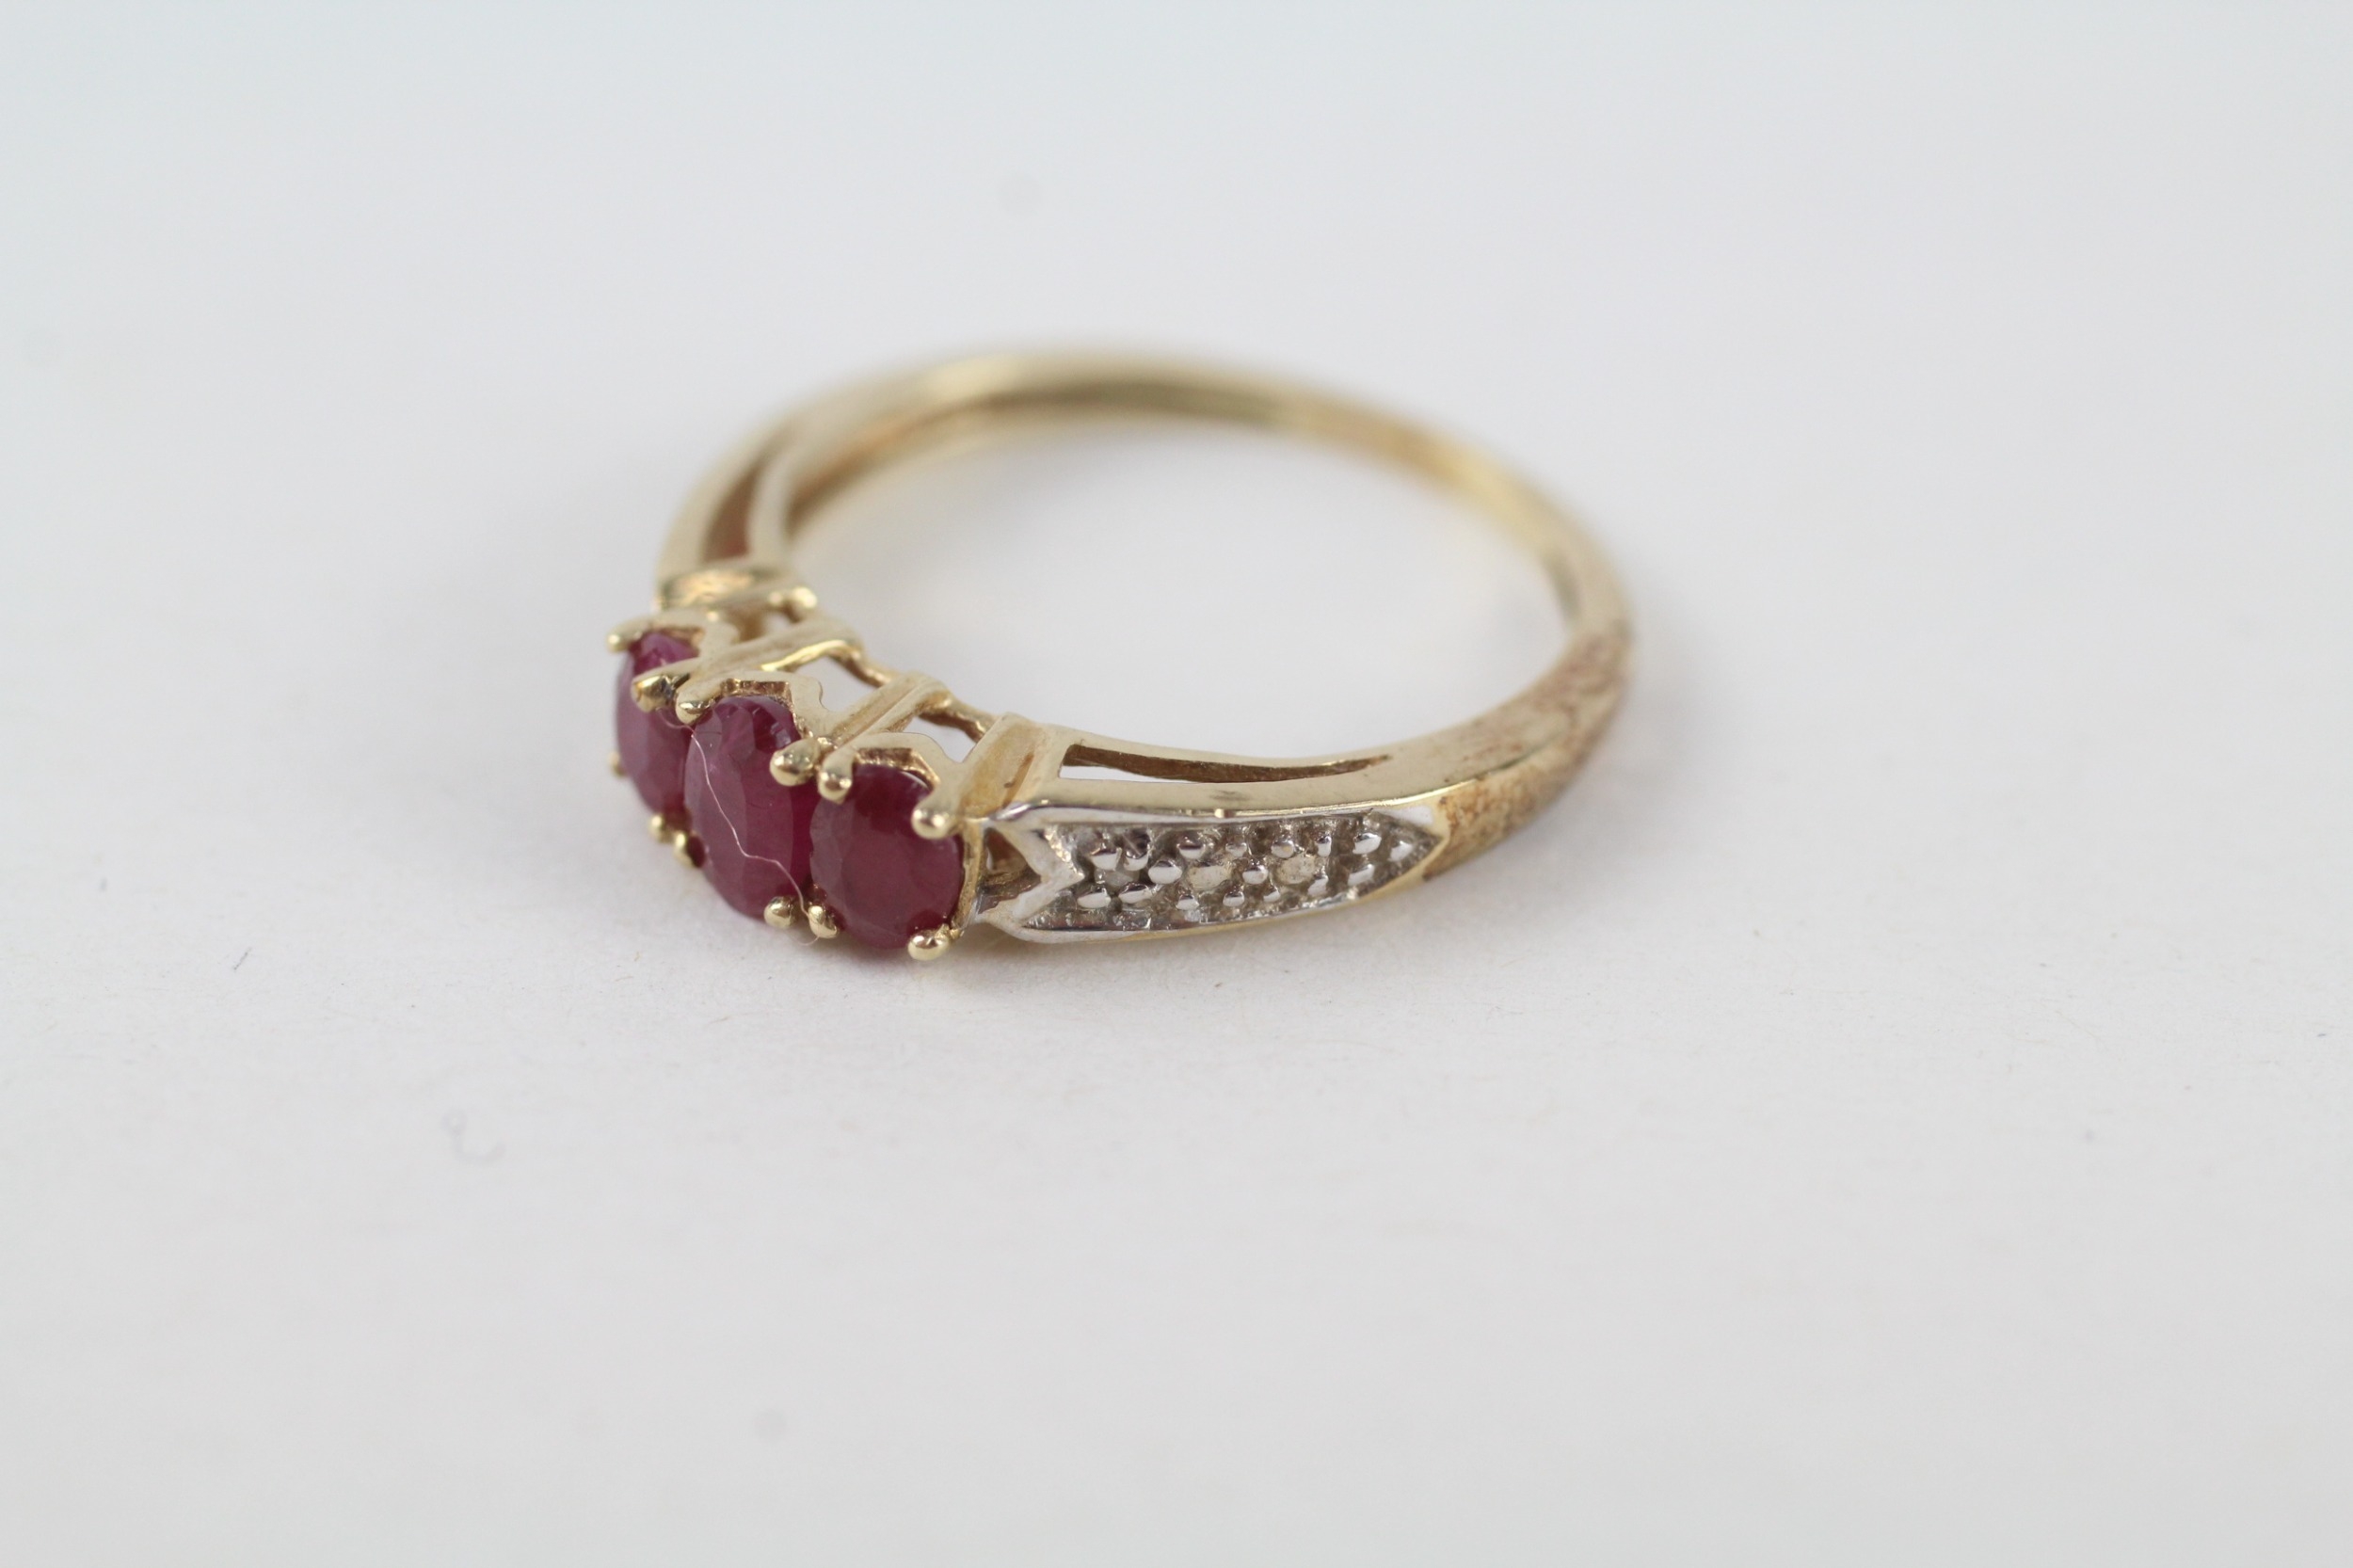 9ct gold oval cut ruby & diamond ring (1.7g) - Image 3 of 4